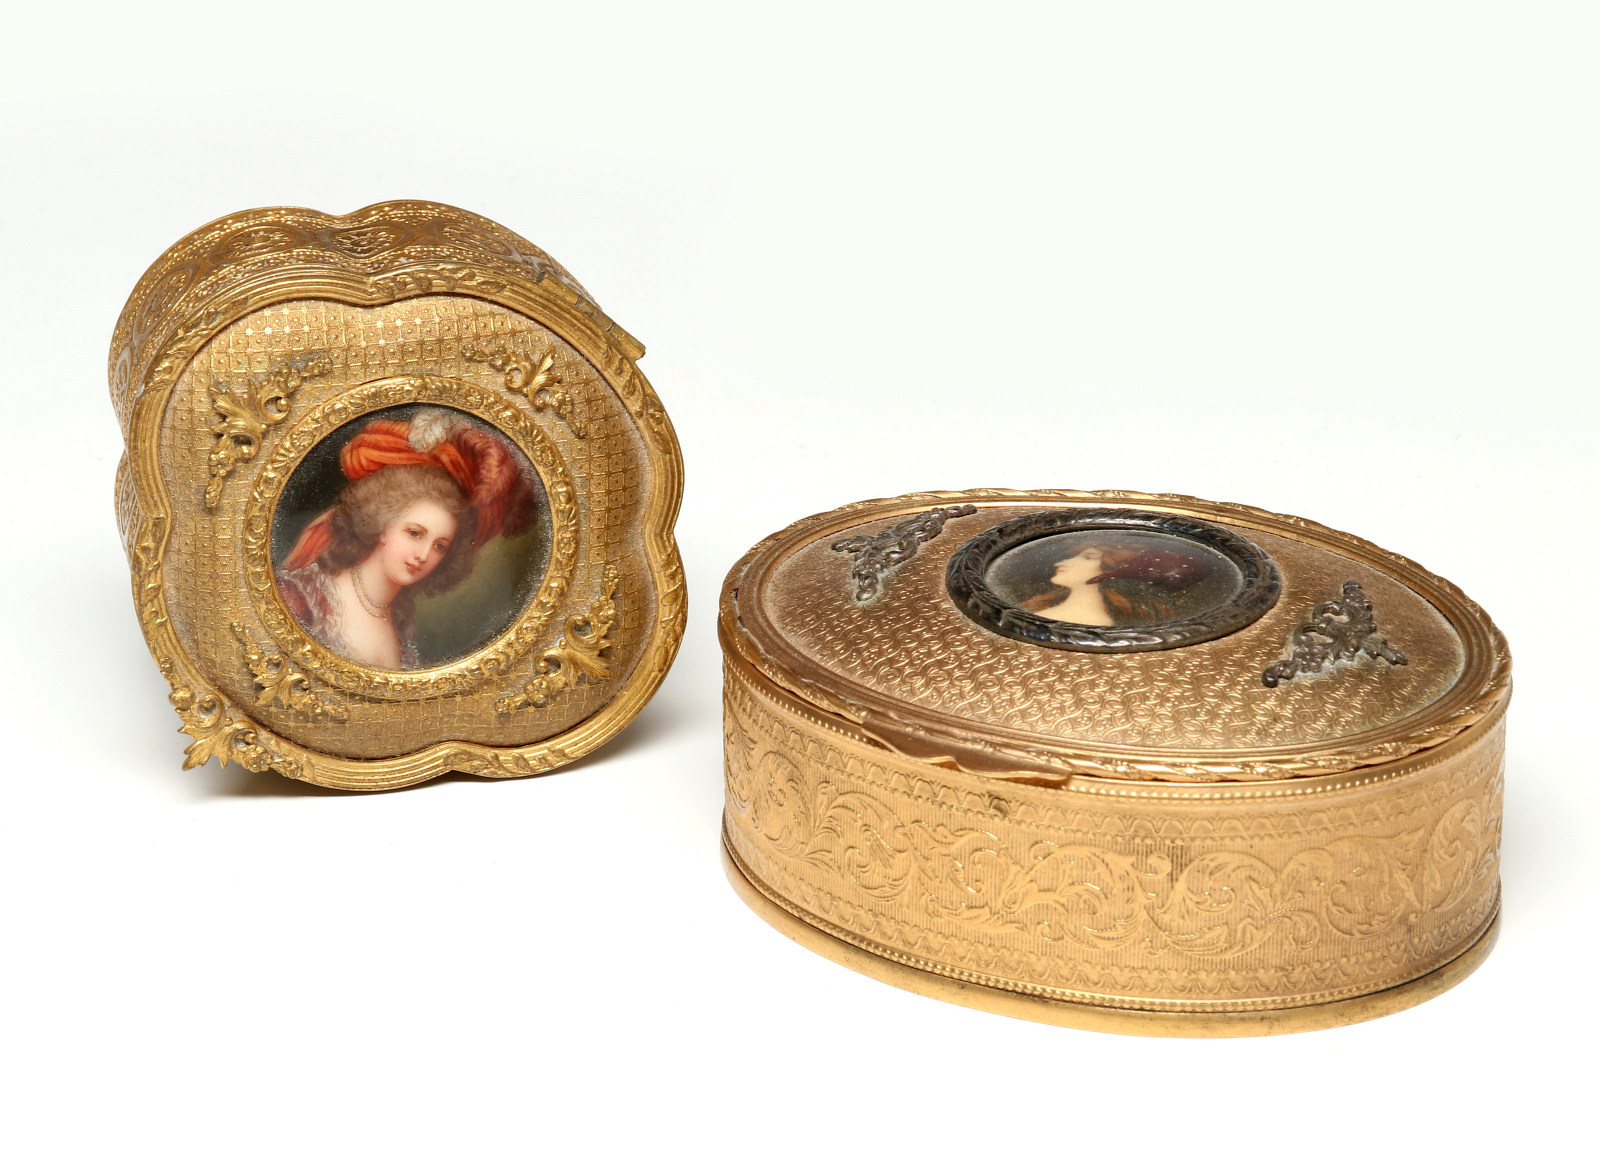 TWO FRENCH ORMOLU BOXES WITH PORCELAIN PLAQUES